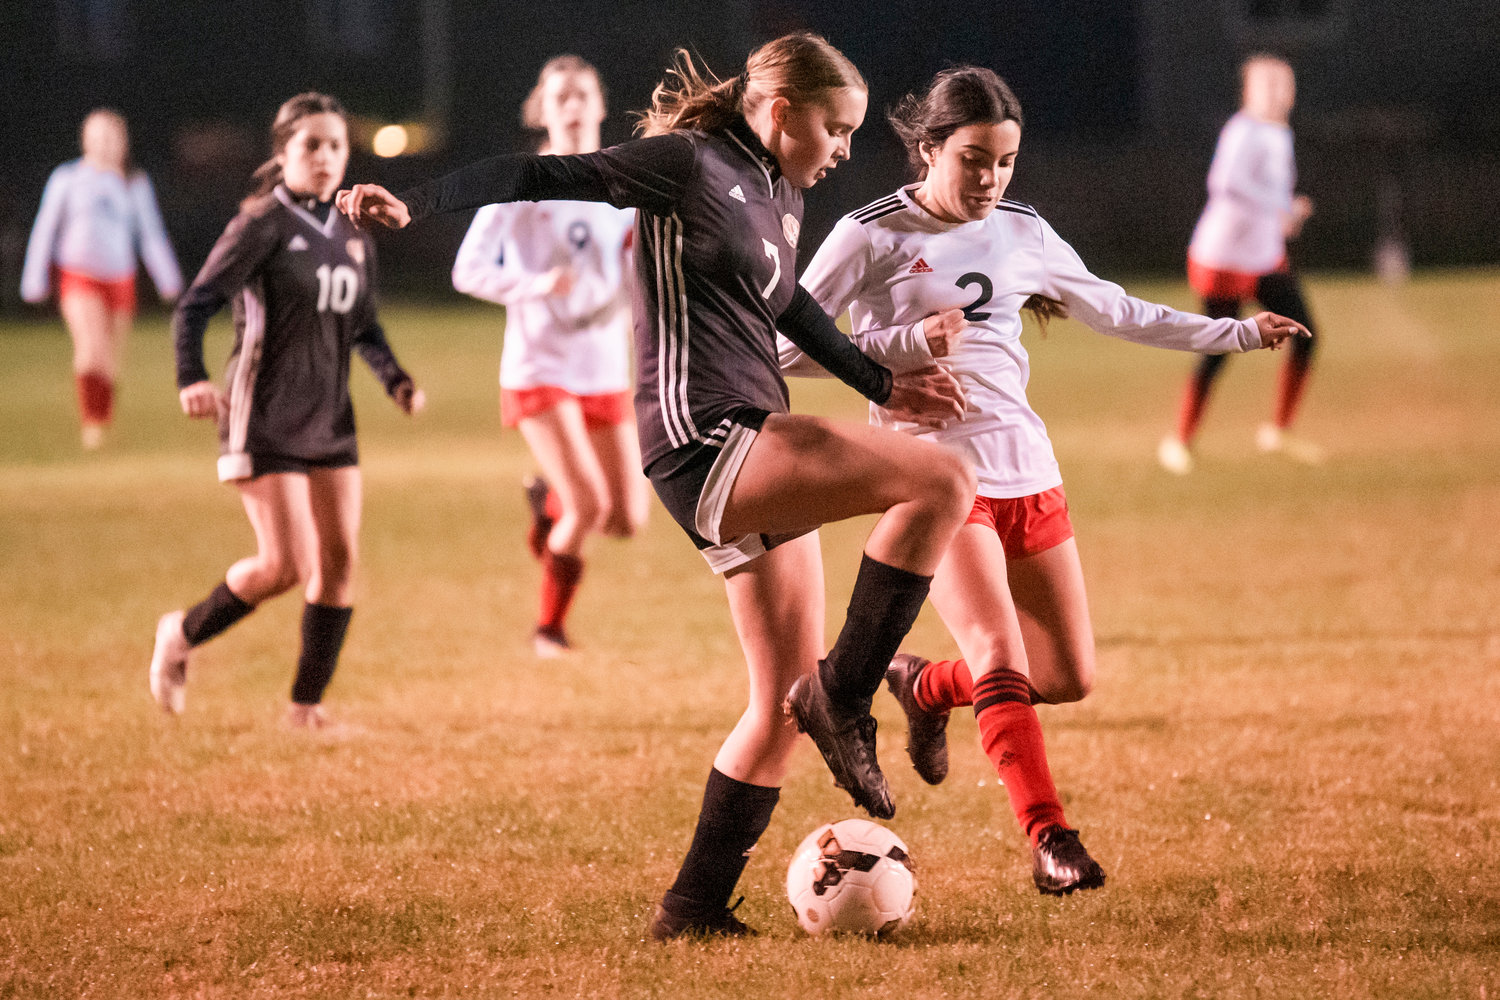 Napavine’s Haley Gallagher (7) and Toledo’s Jazzy Zarate (2) fight for possession of the ball during a game Monday night.